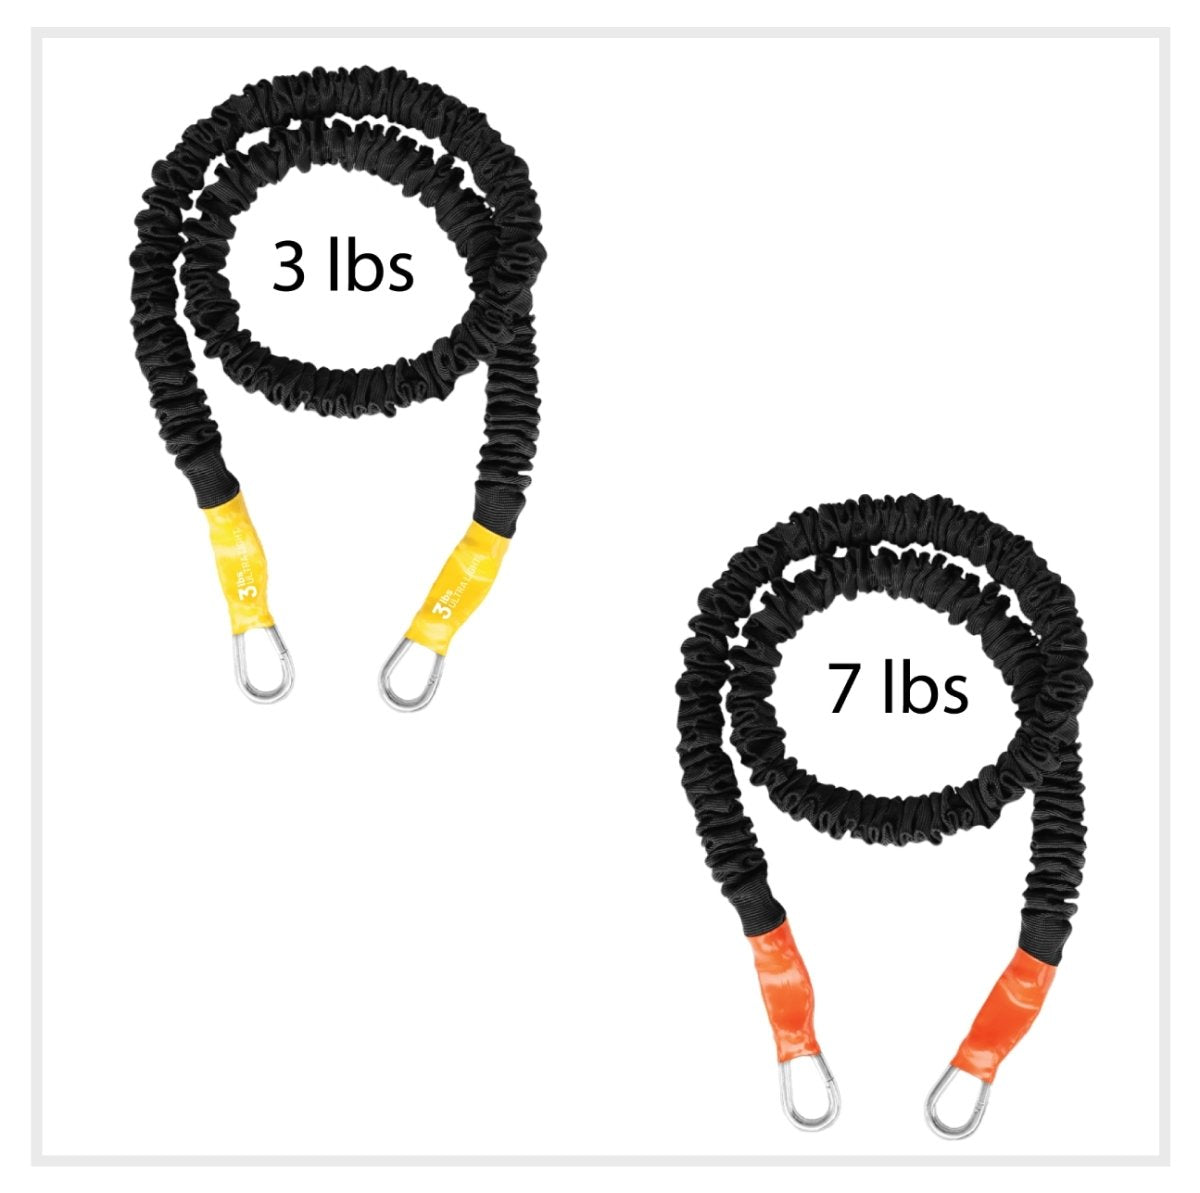 Ultra light and Very light covered resistance bands for stacking. 3lb and 7lb tension bands with clips for stacking or to use with cuffs, straps and resistance fitness bars. Together this set of bands are 10lbs of resistance for beginners or to add to other bands for more resistance level control. Made in American by FitCord 